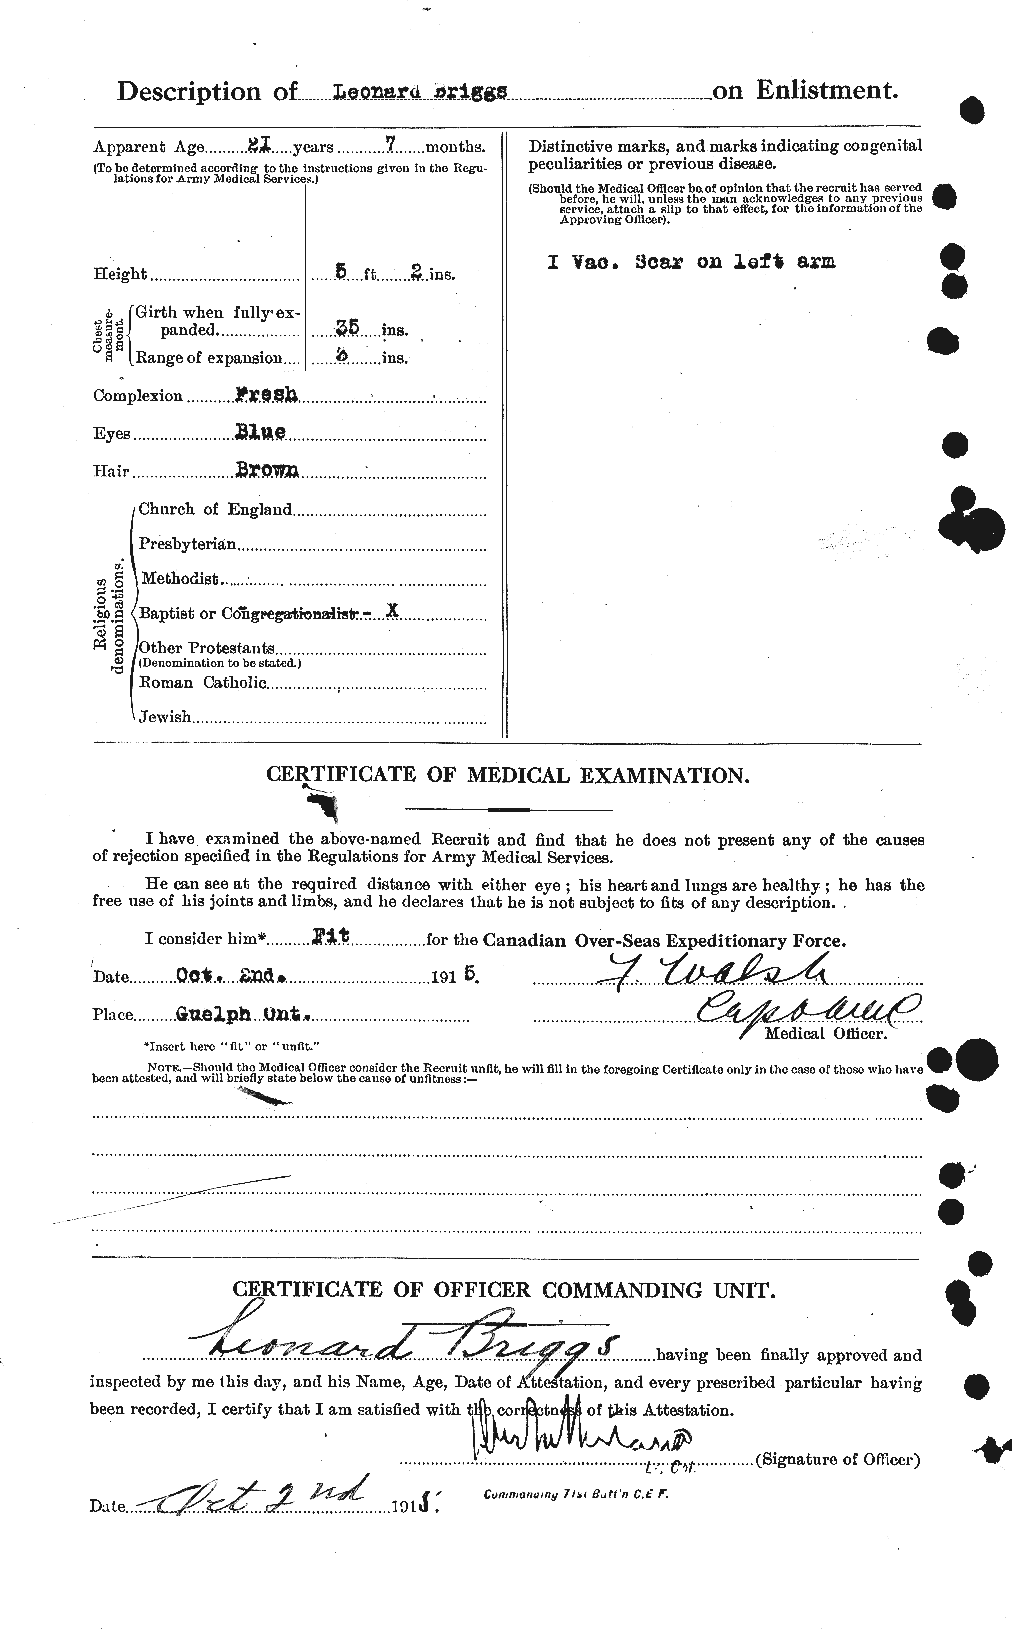 Personnel Records of the First World War - CEF 264072b